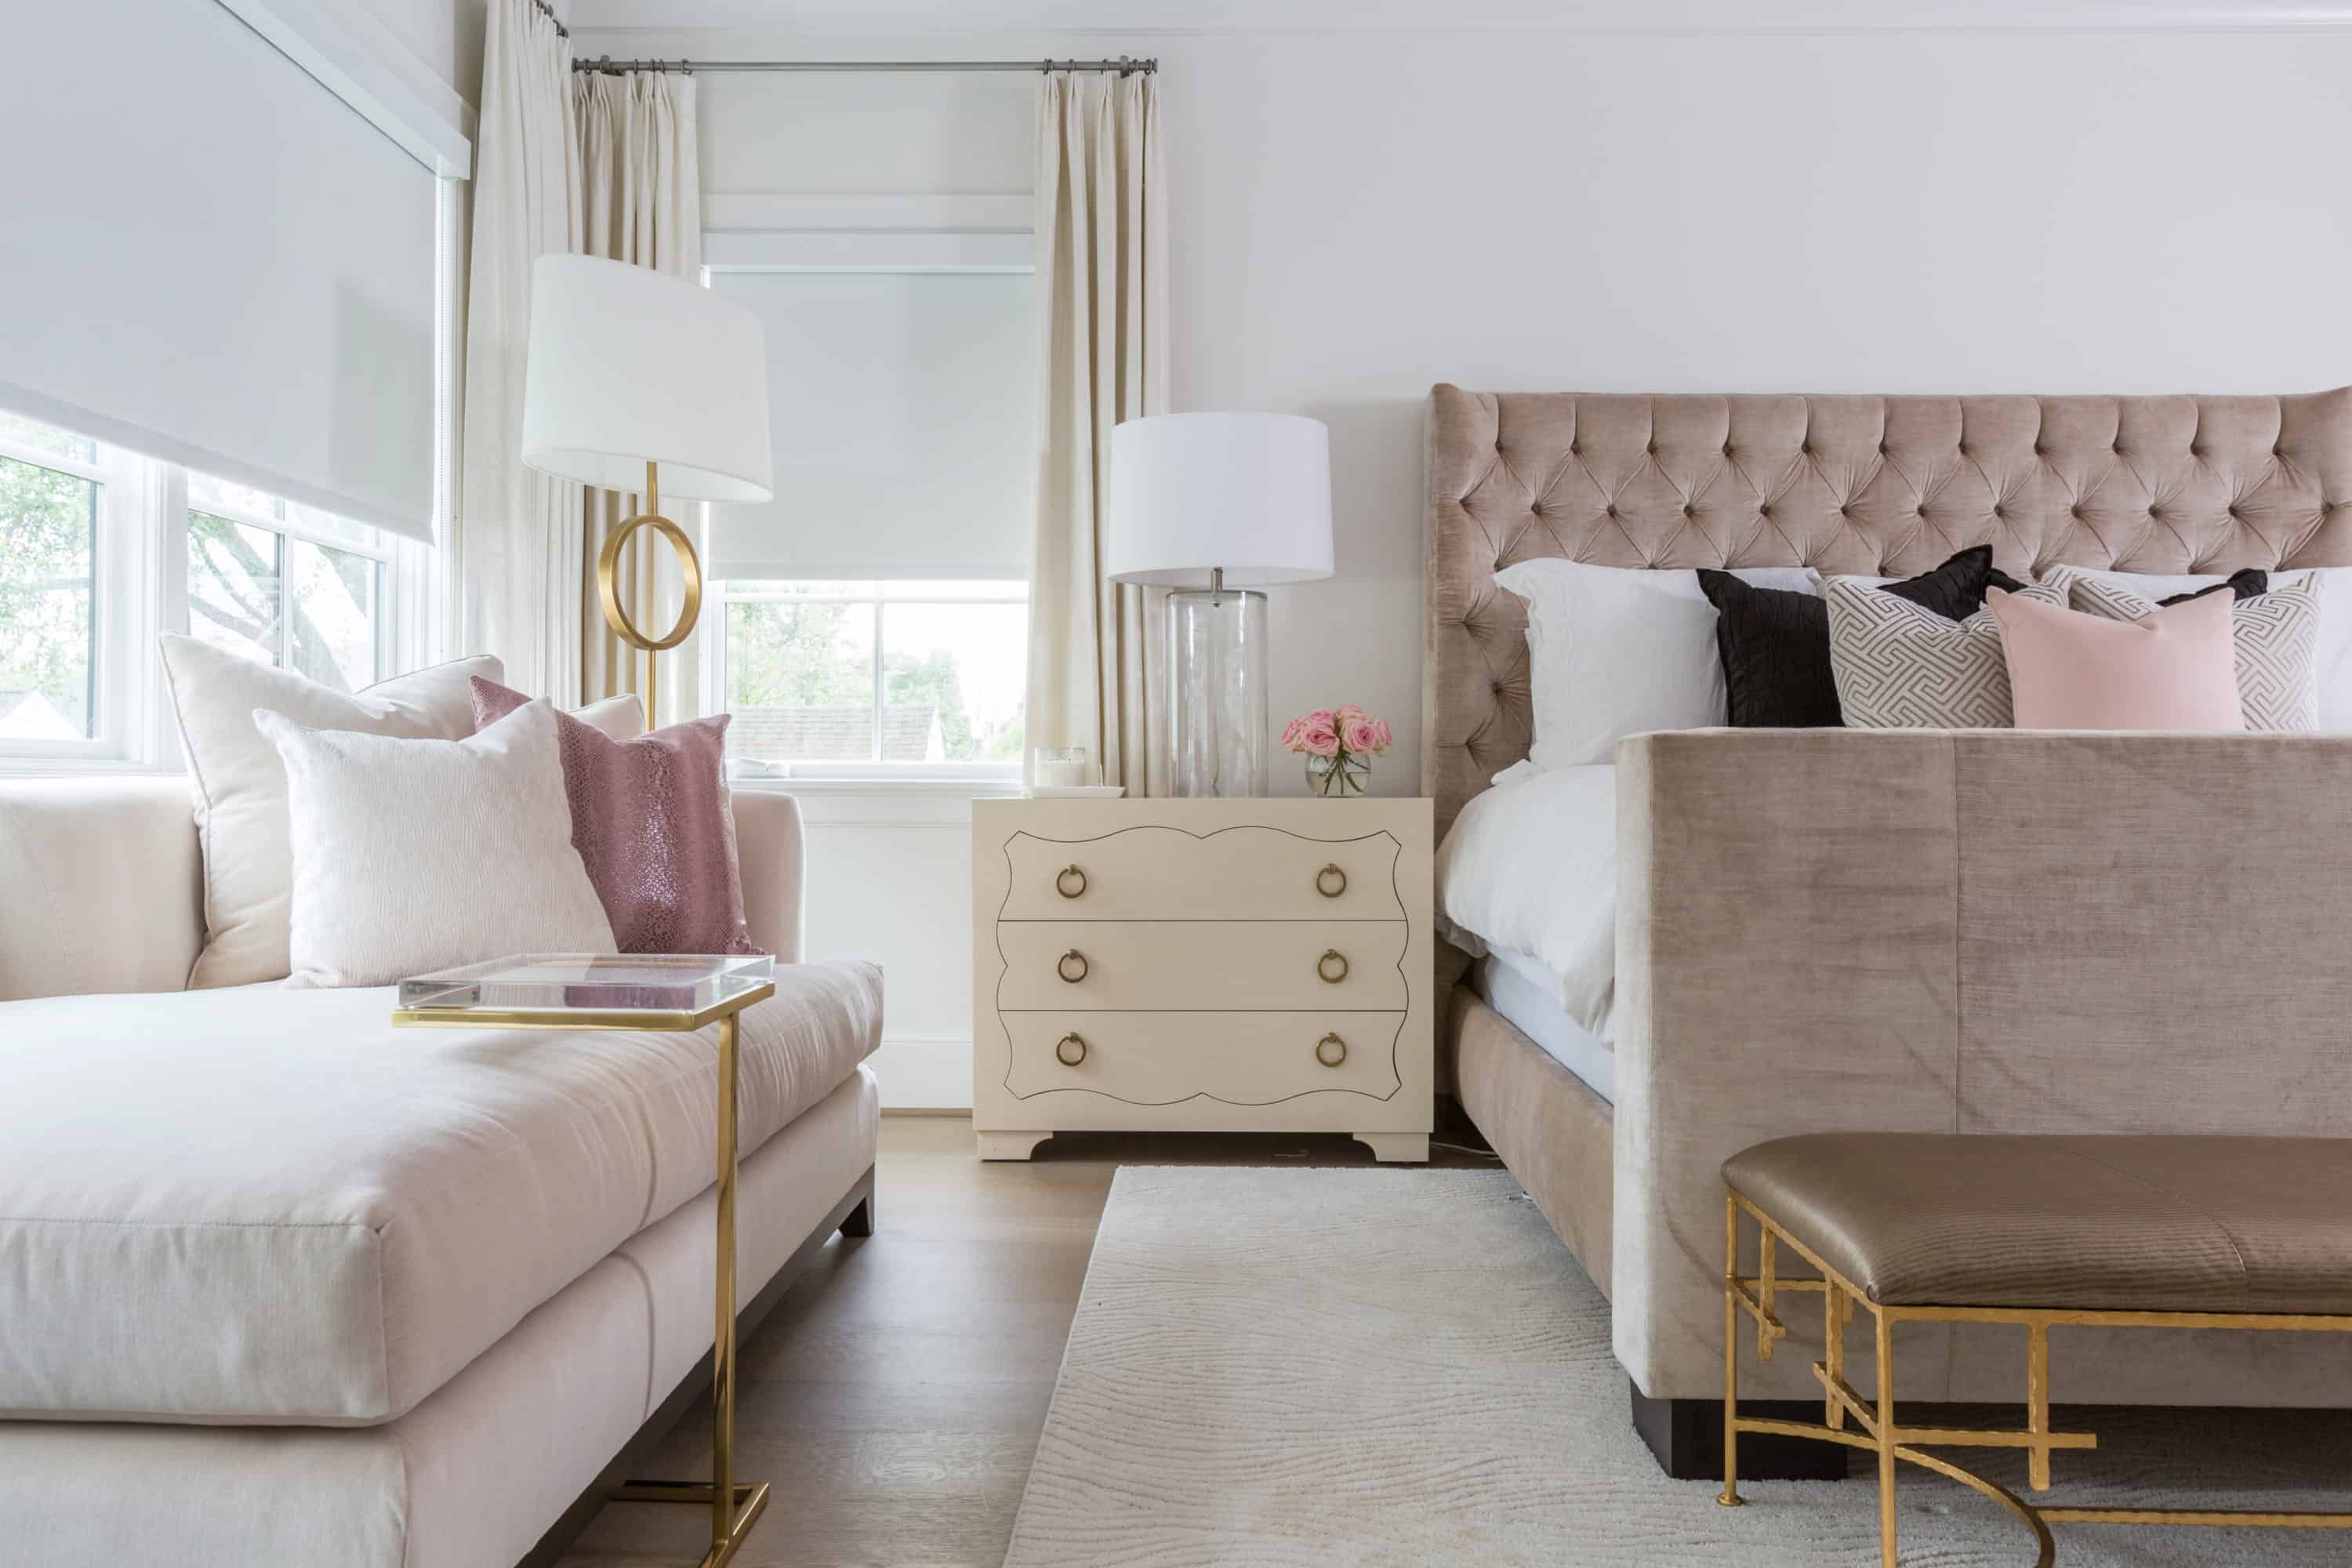 Martini Luxe accent table from Century Furniture is the perfect fit for this feminine bedroom